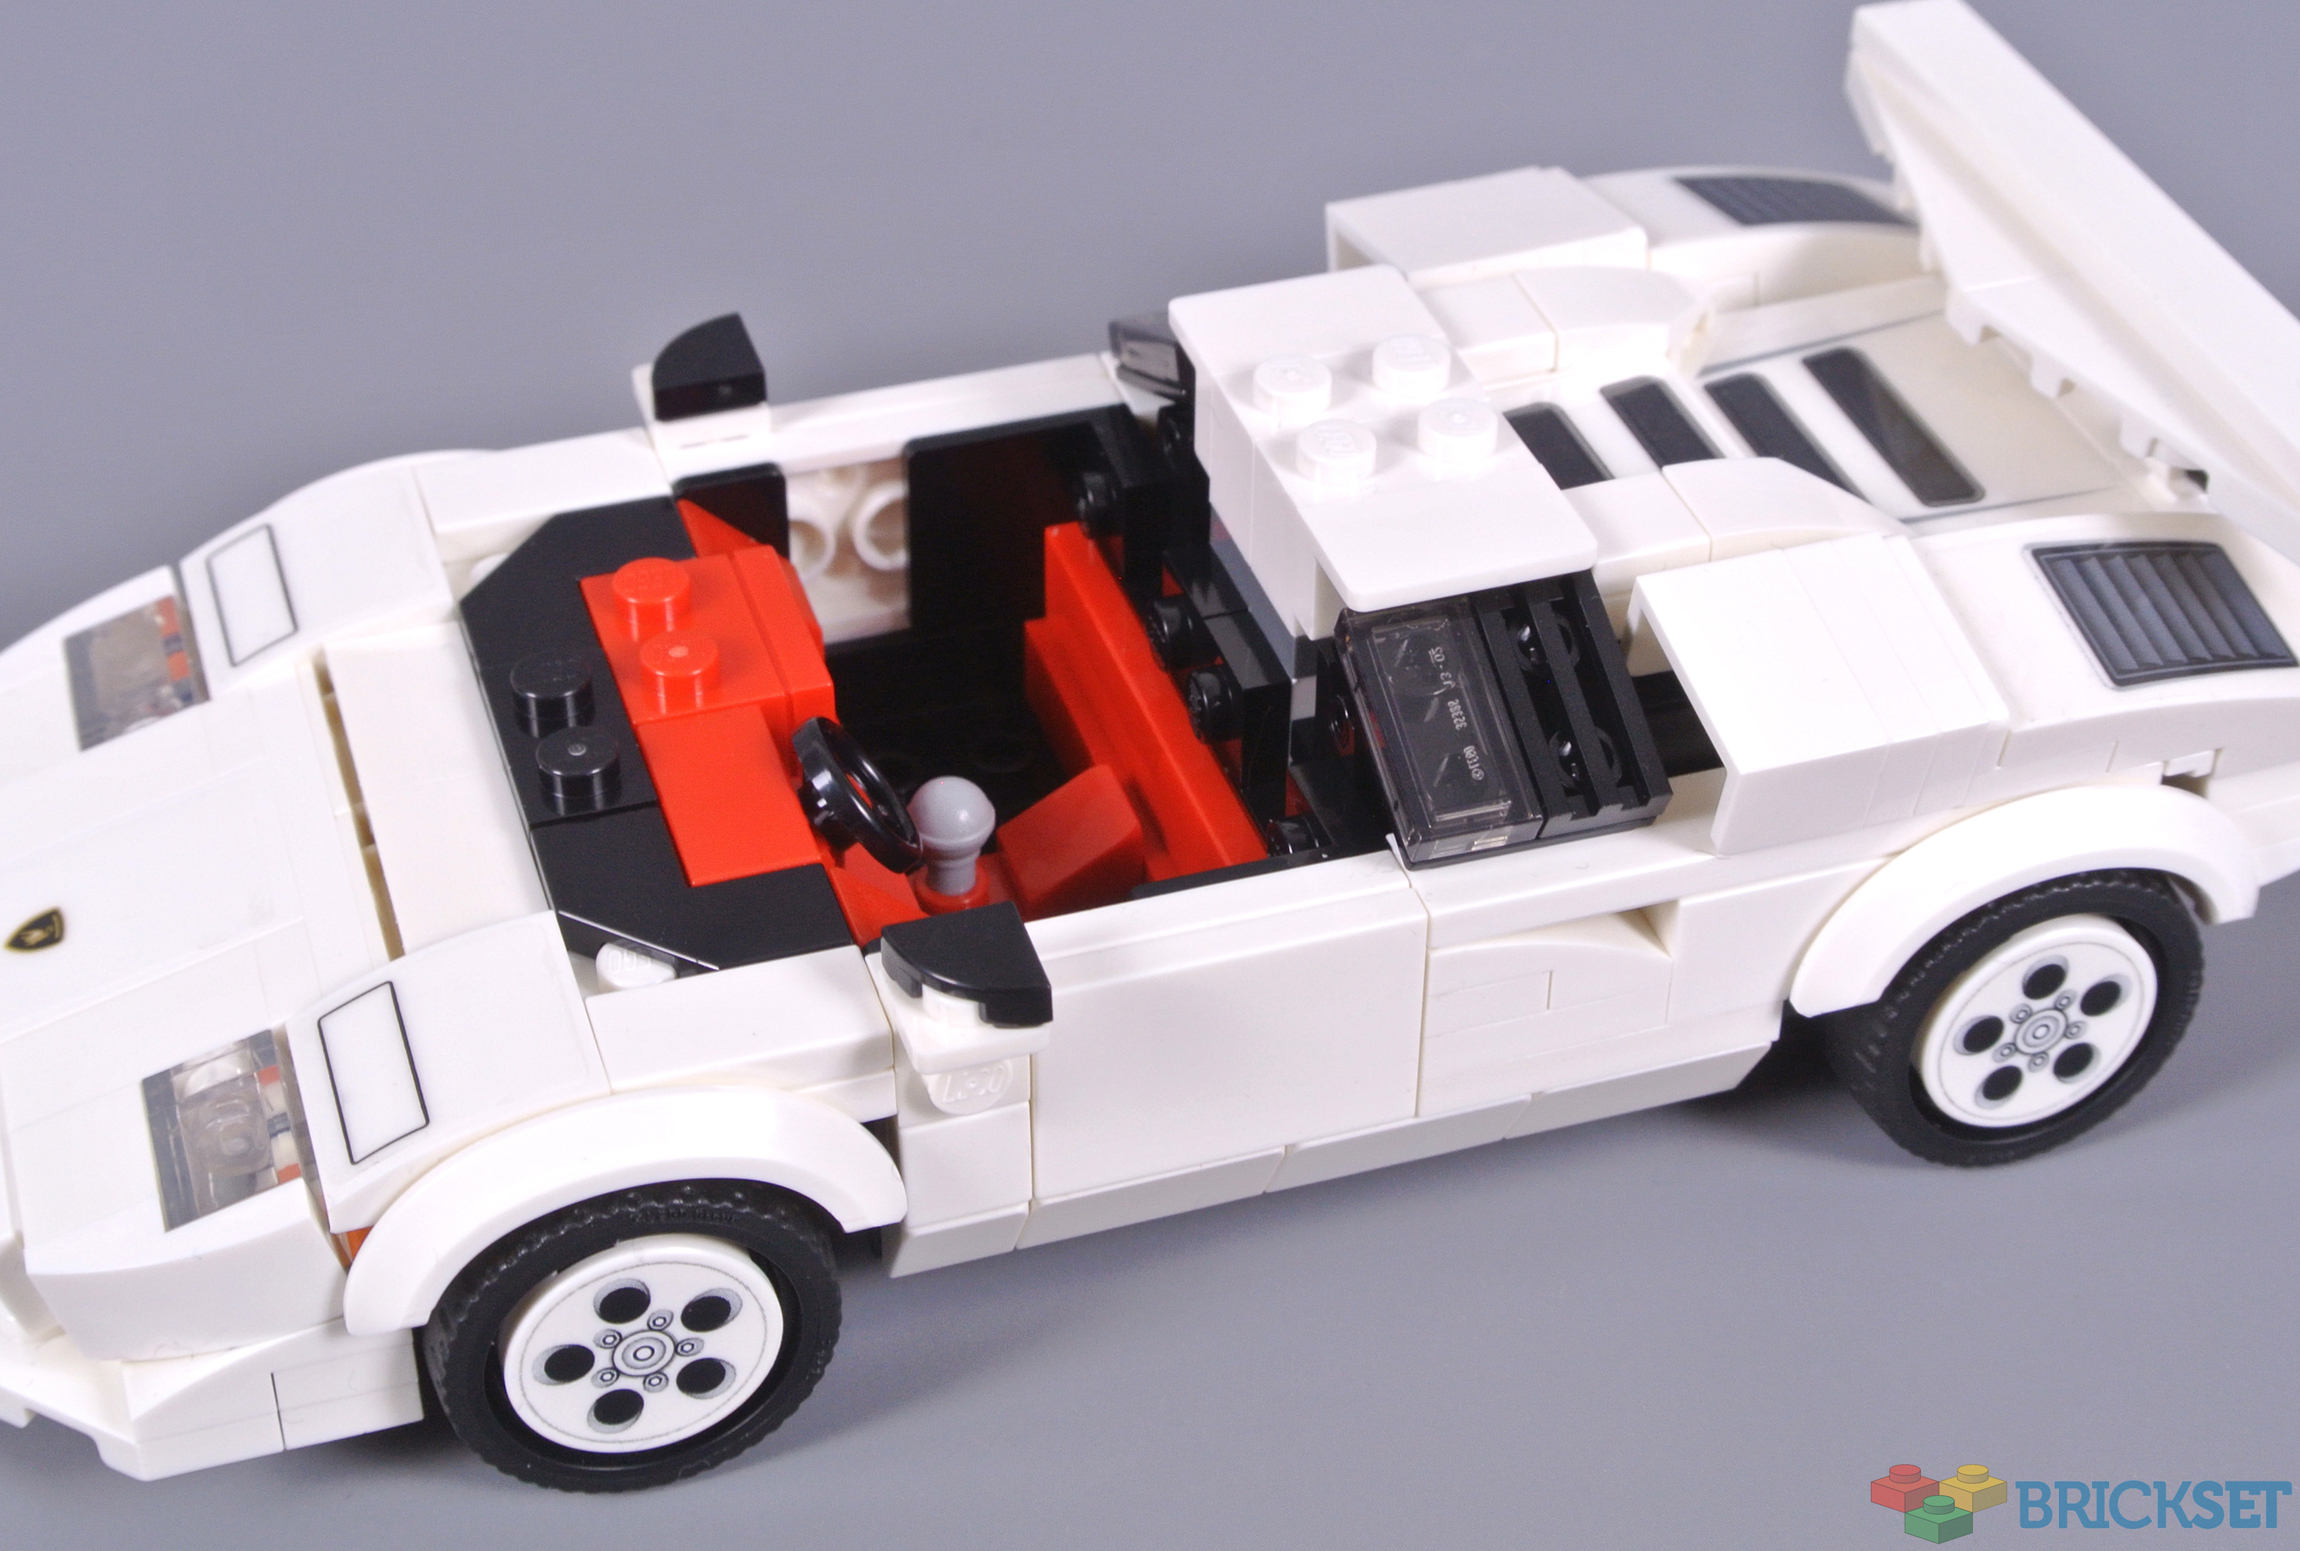 2024 LEGO Speed Champions Set Will Include An Exclusive Licensed Lamborghini  Supercar - LamboCARS